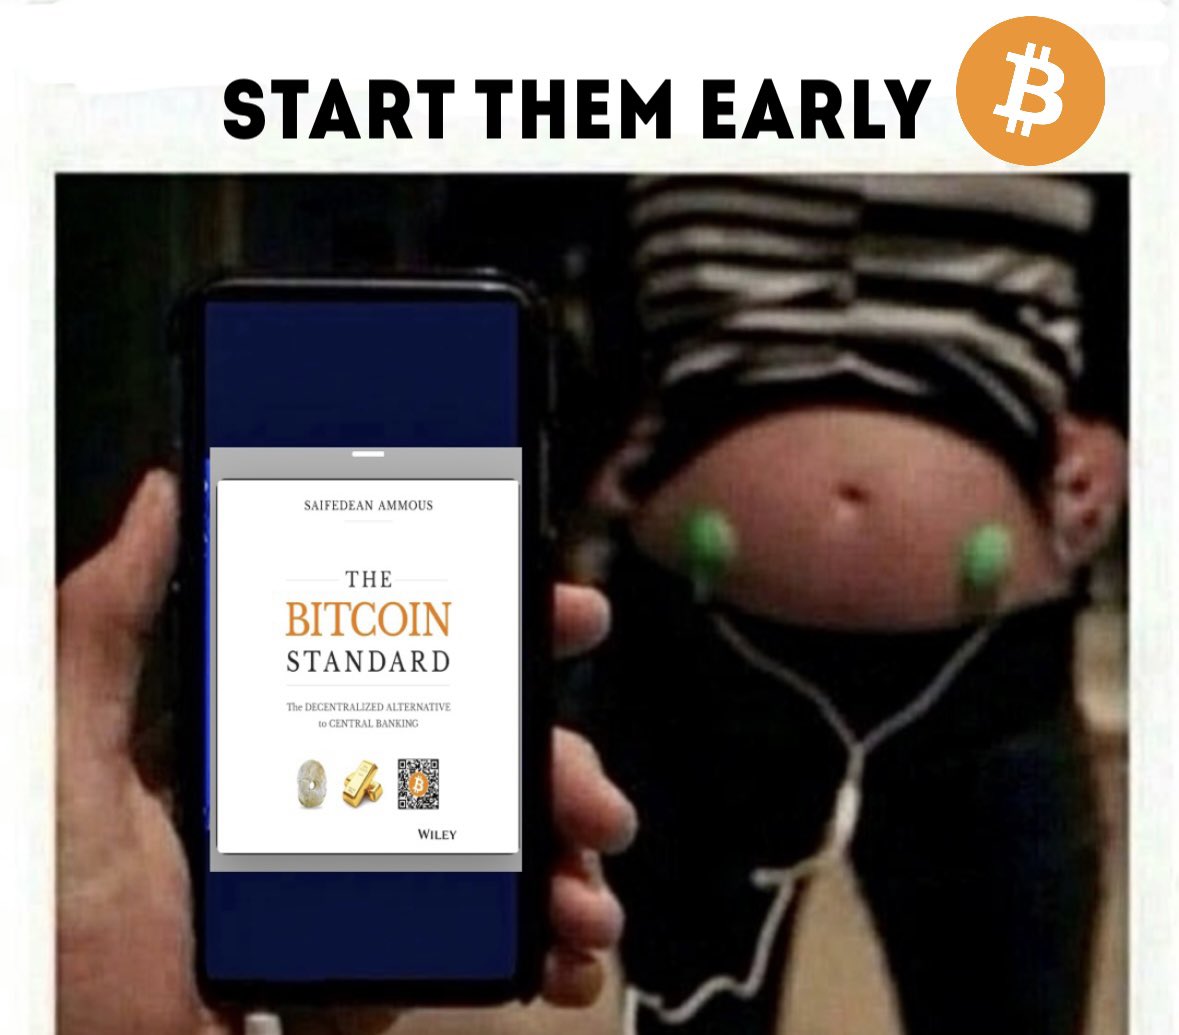 START THEM EARLY